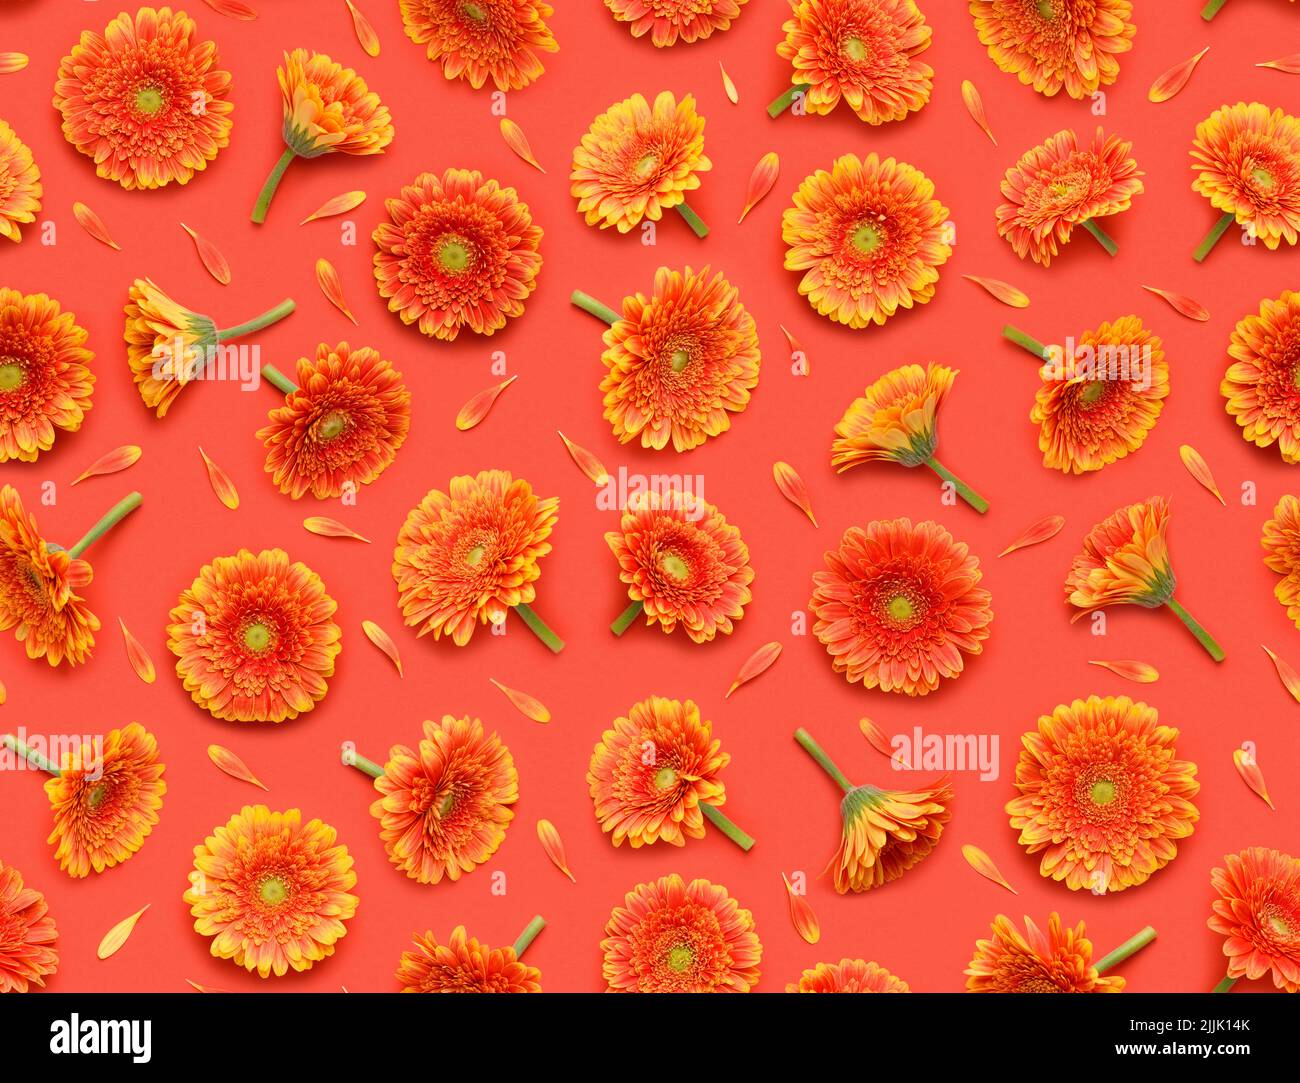 Seamless floral pattern of gerbera flowers and petals on red background top view flat lay Stock Photo